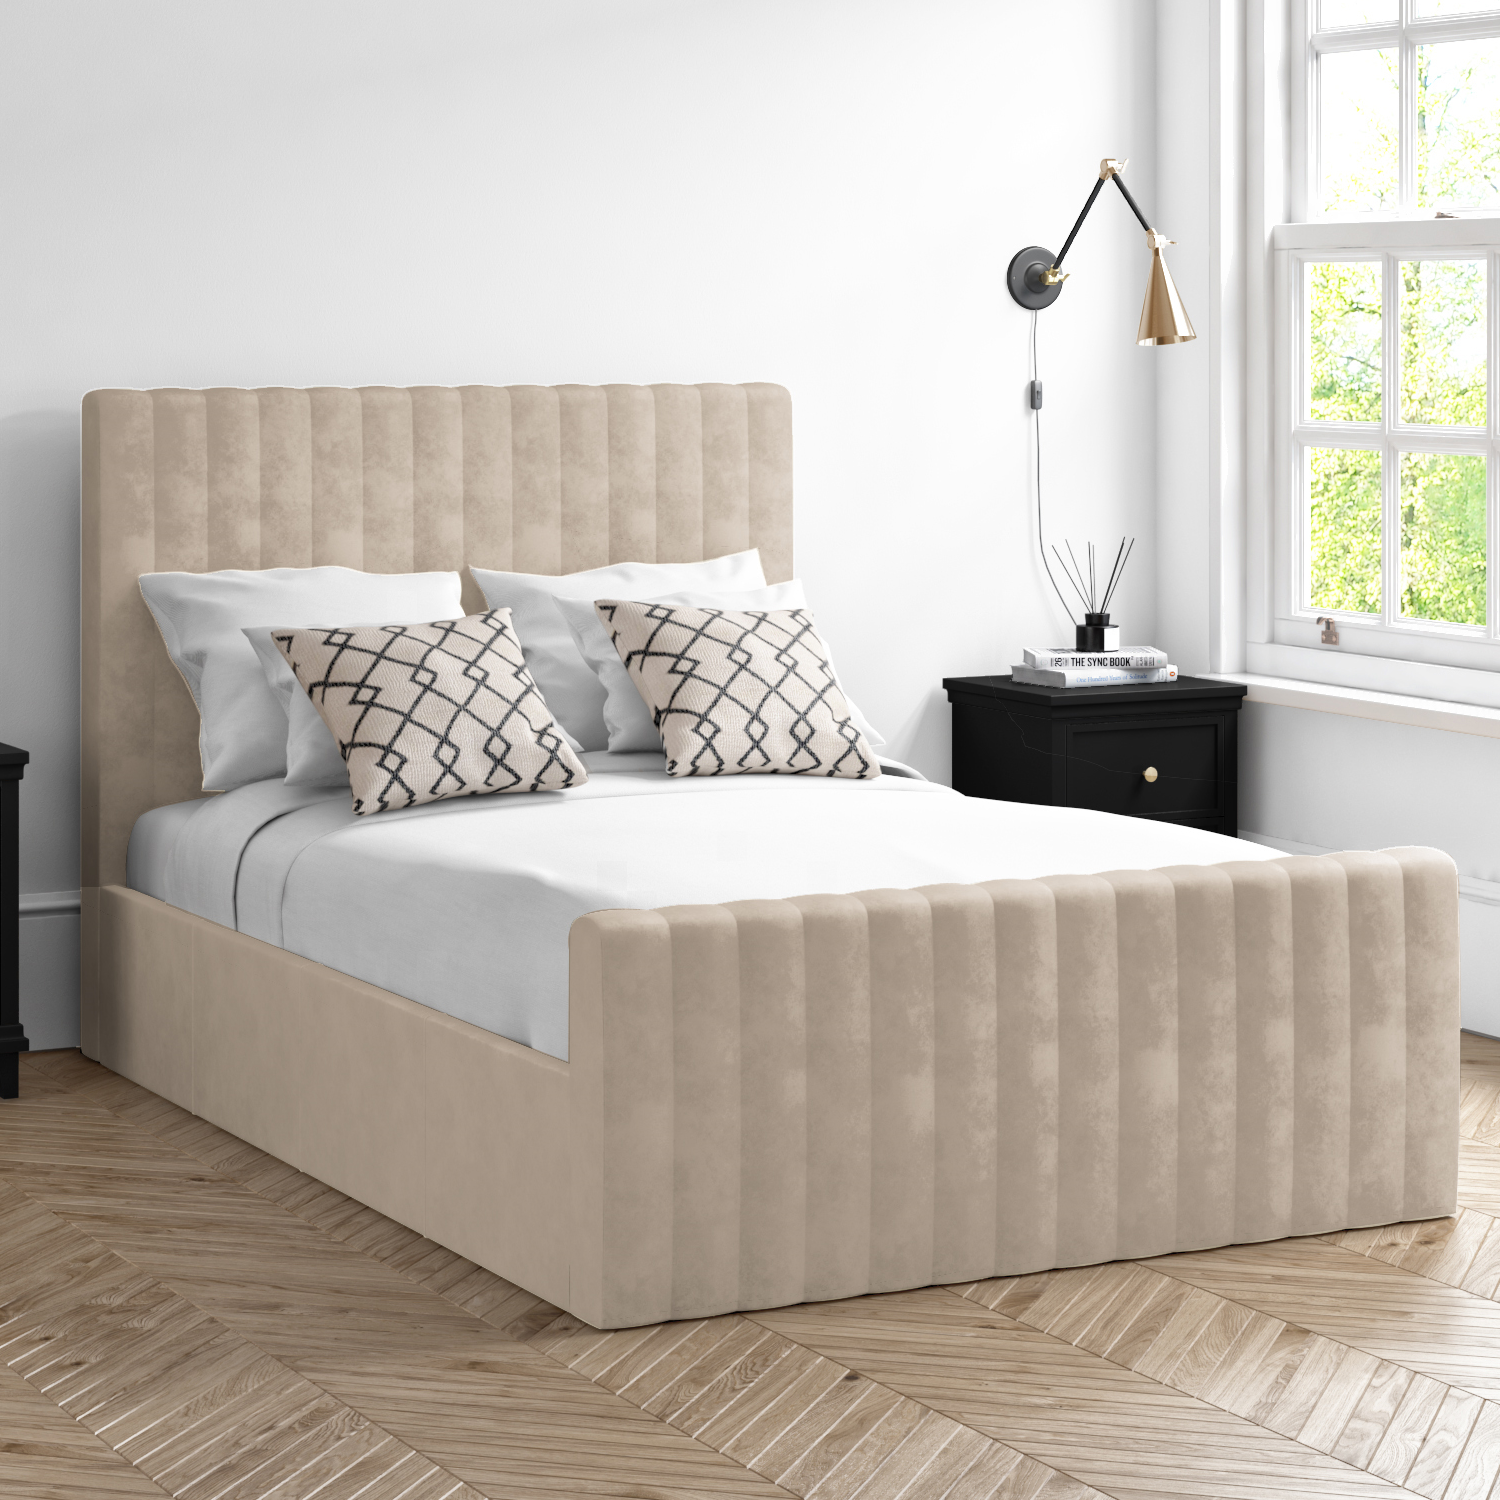 Read more about Side opening beige velvet double ottoman bed khloe